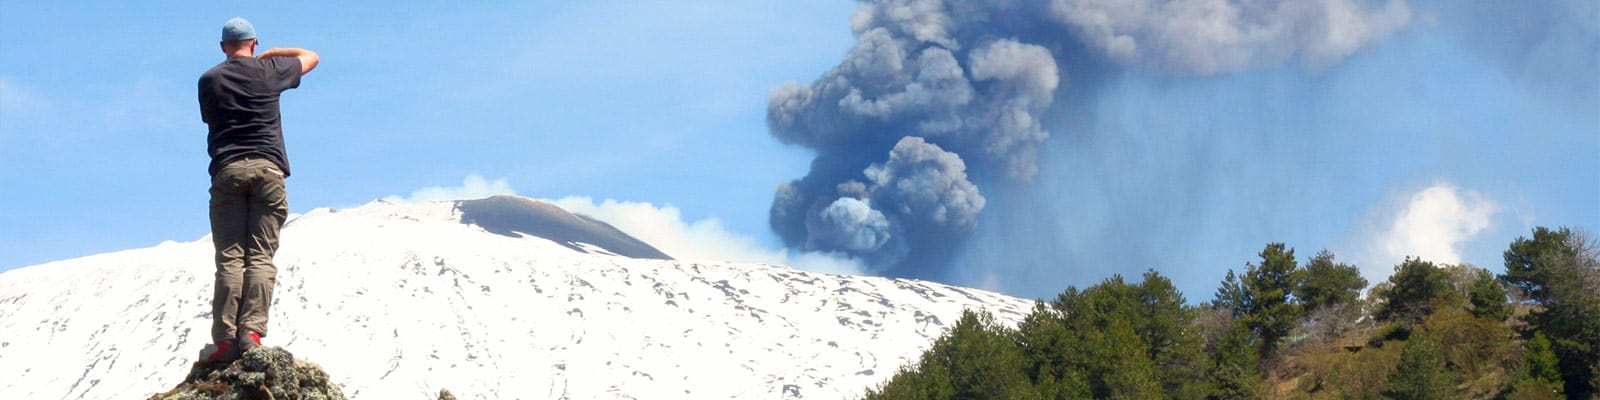 A man stands on a rocky outcrop photographing an eruption on Mount Etna